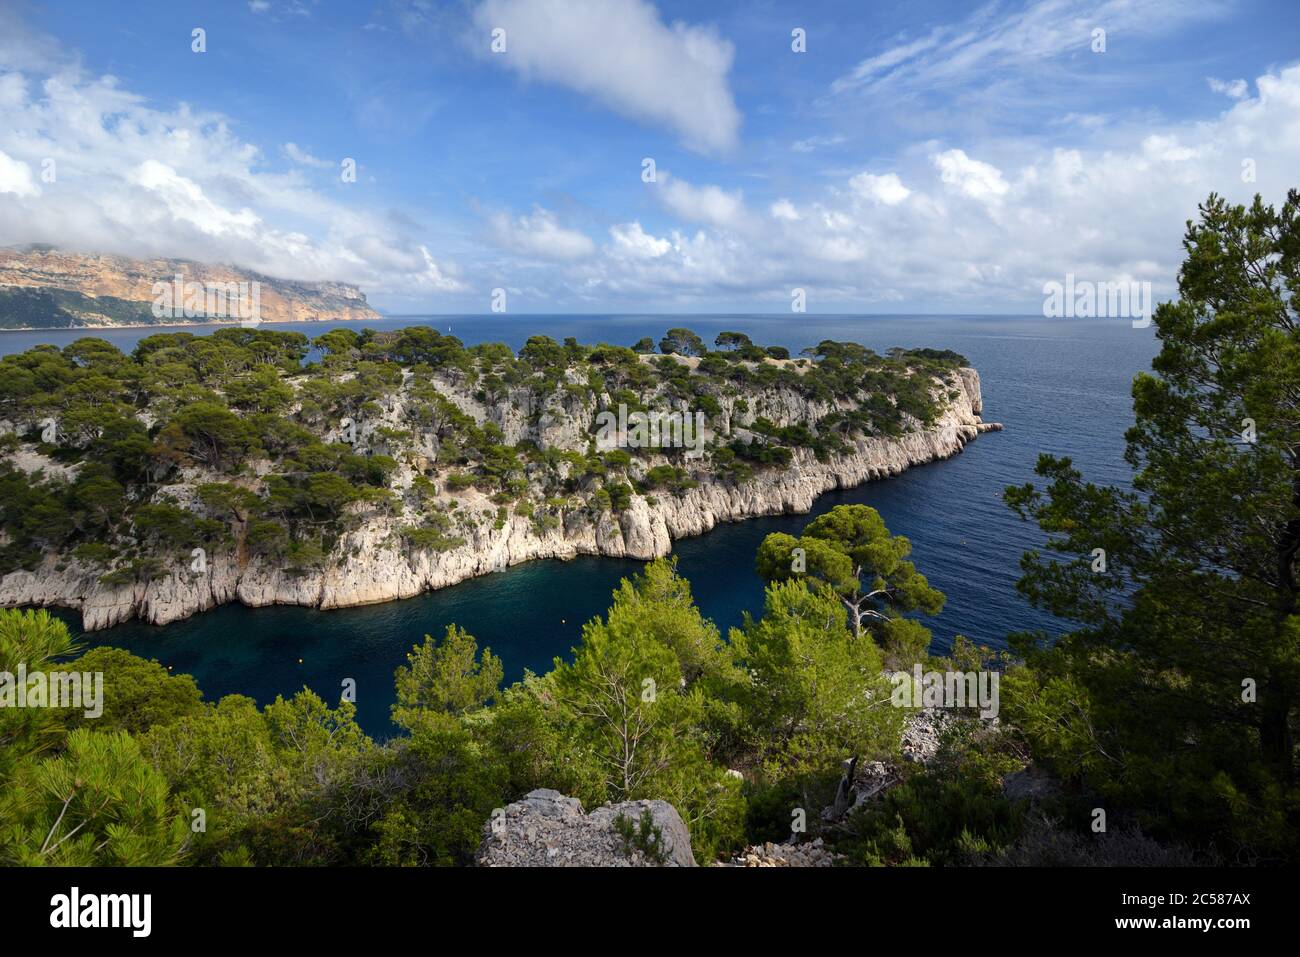 Calanque Port-Pin &, in distance, Cap Canaille Cape or Headland & Mediterranean Sea at Cassis in the Calanques National Park Provence France Stock Photo